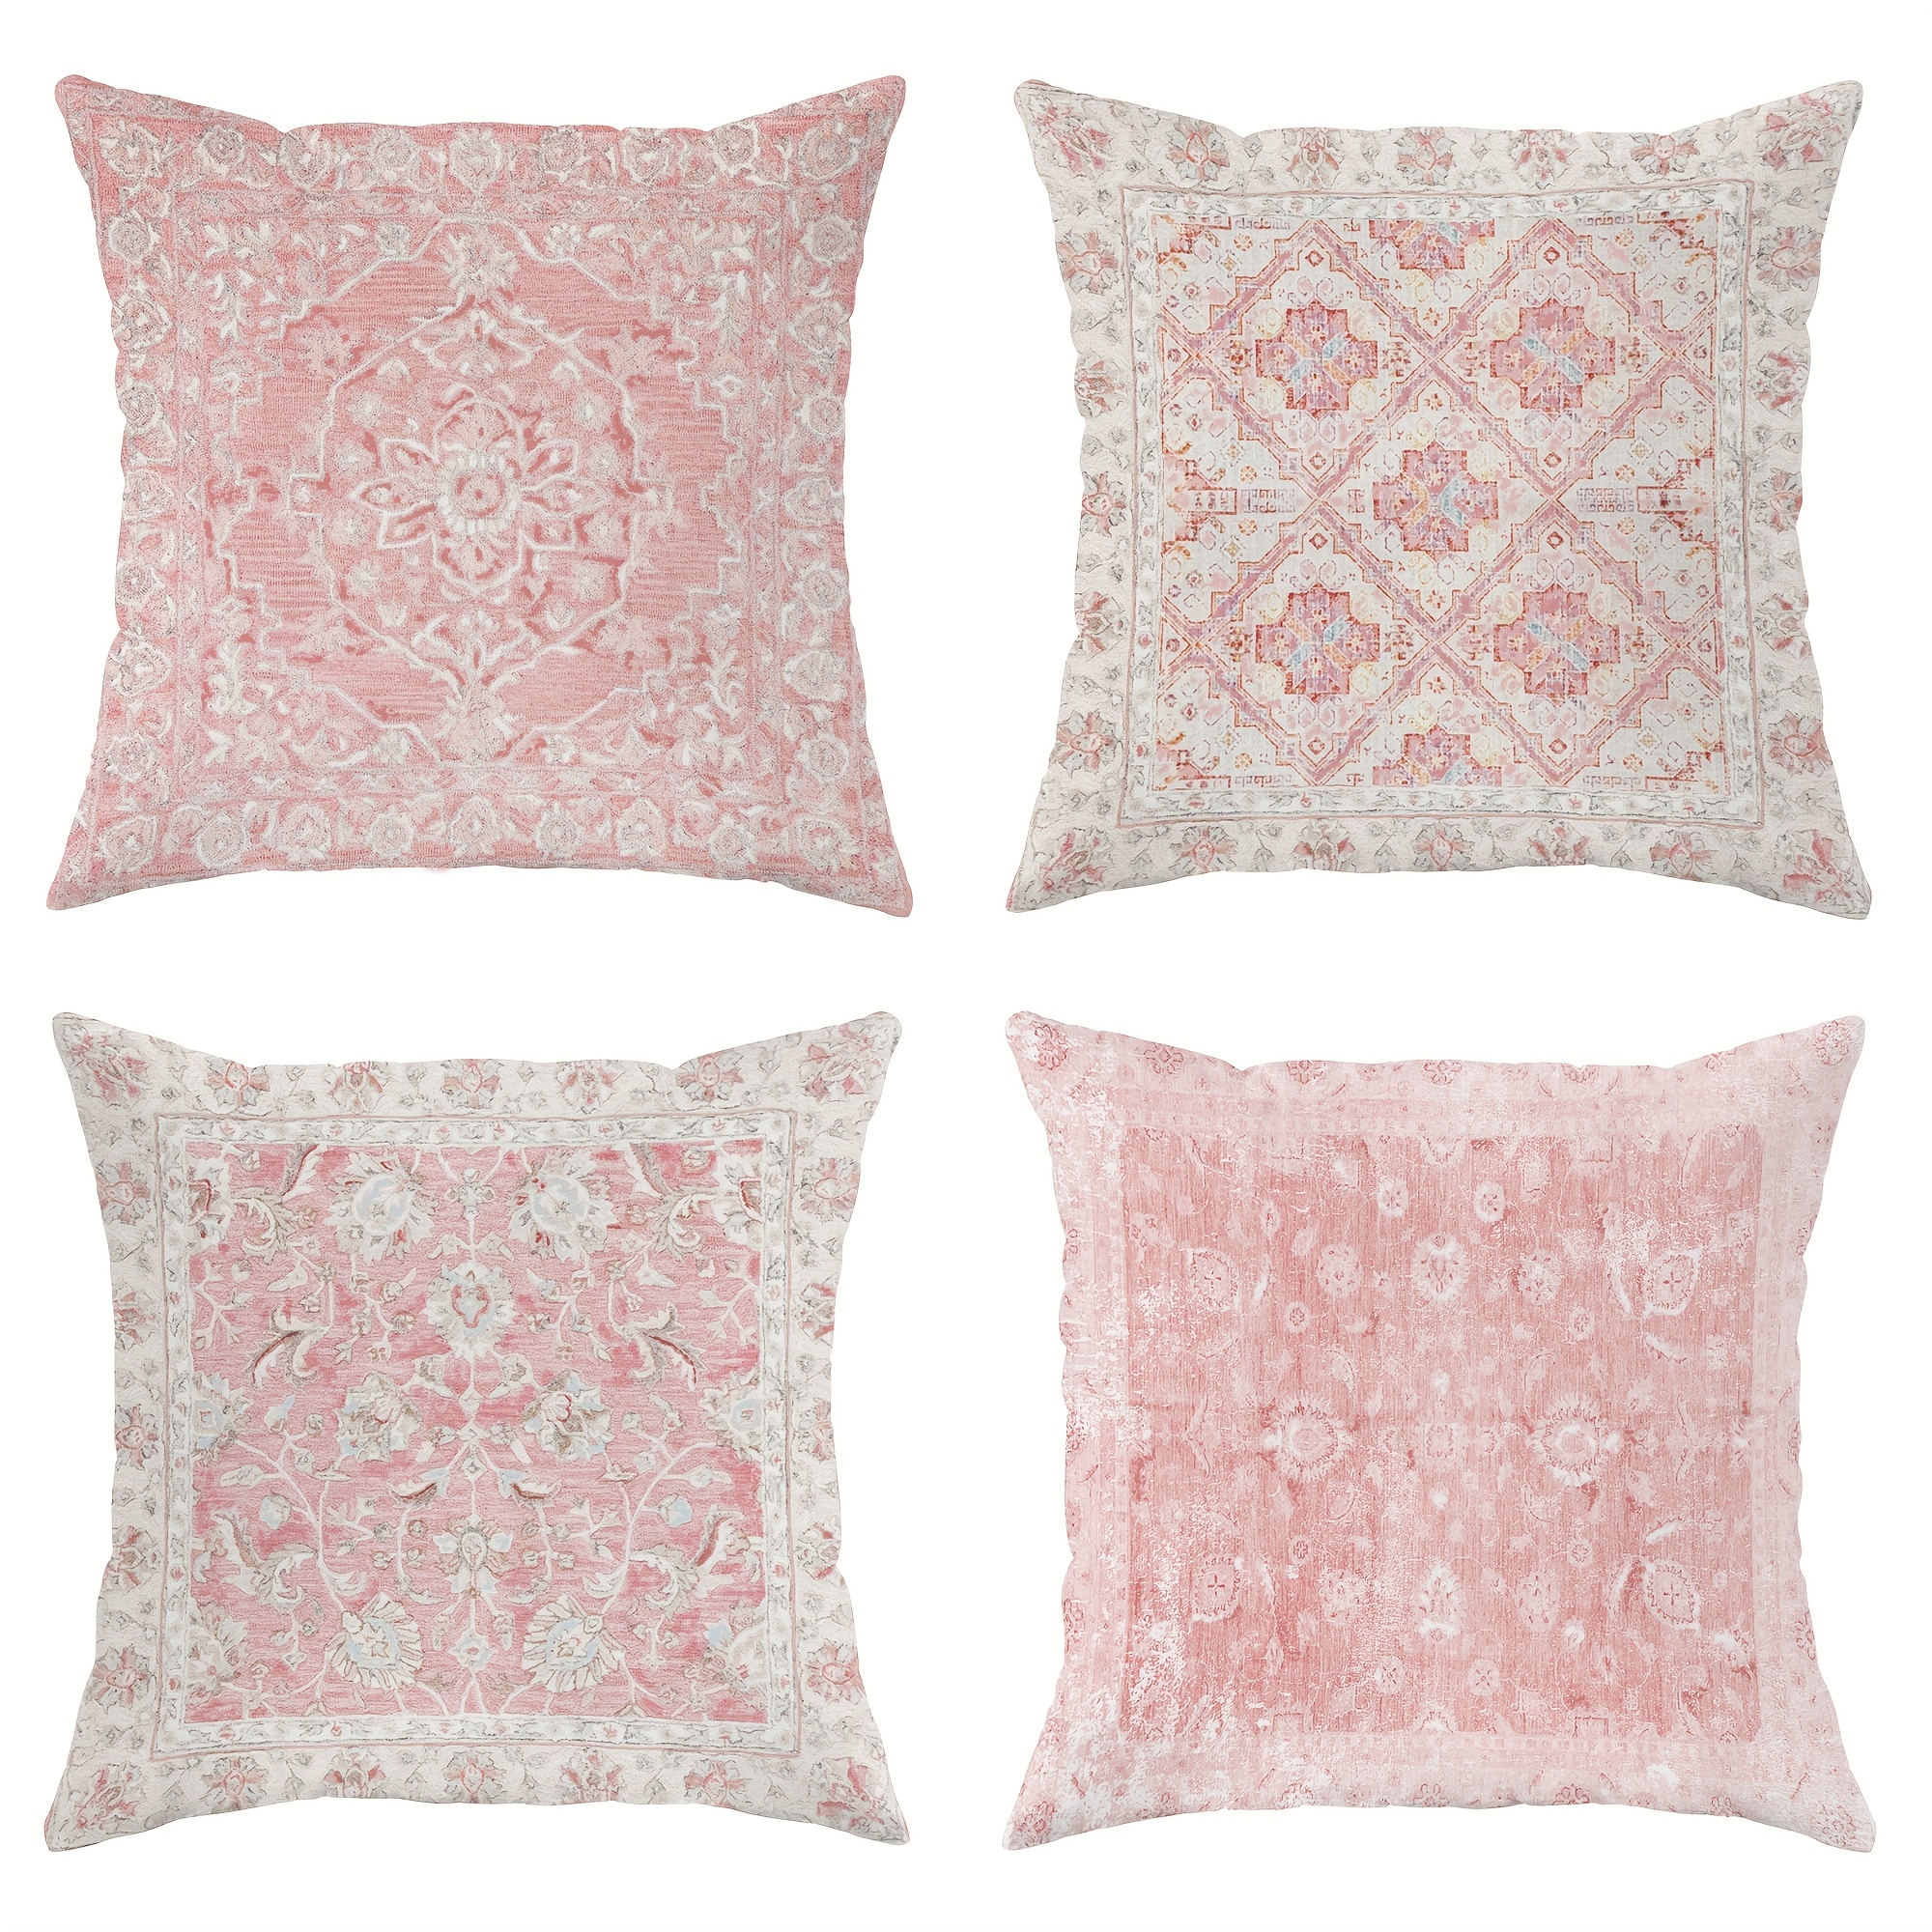 

4-piece Set Bohemian Velvet Throw Pillow Covers - Persian Floral Design, Pink, 18x18 Inches - Zip Closure, Machine Washable For Living Room & Bedroom Decor (inserts Not Included)